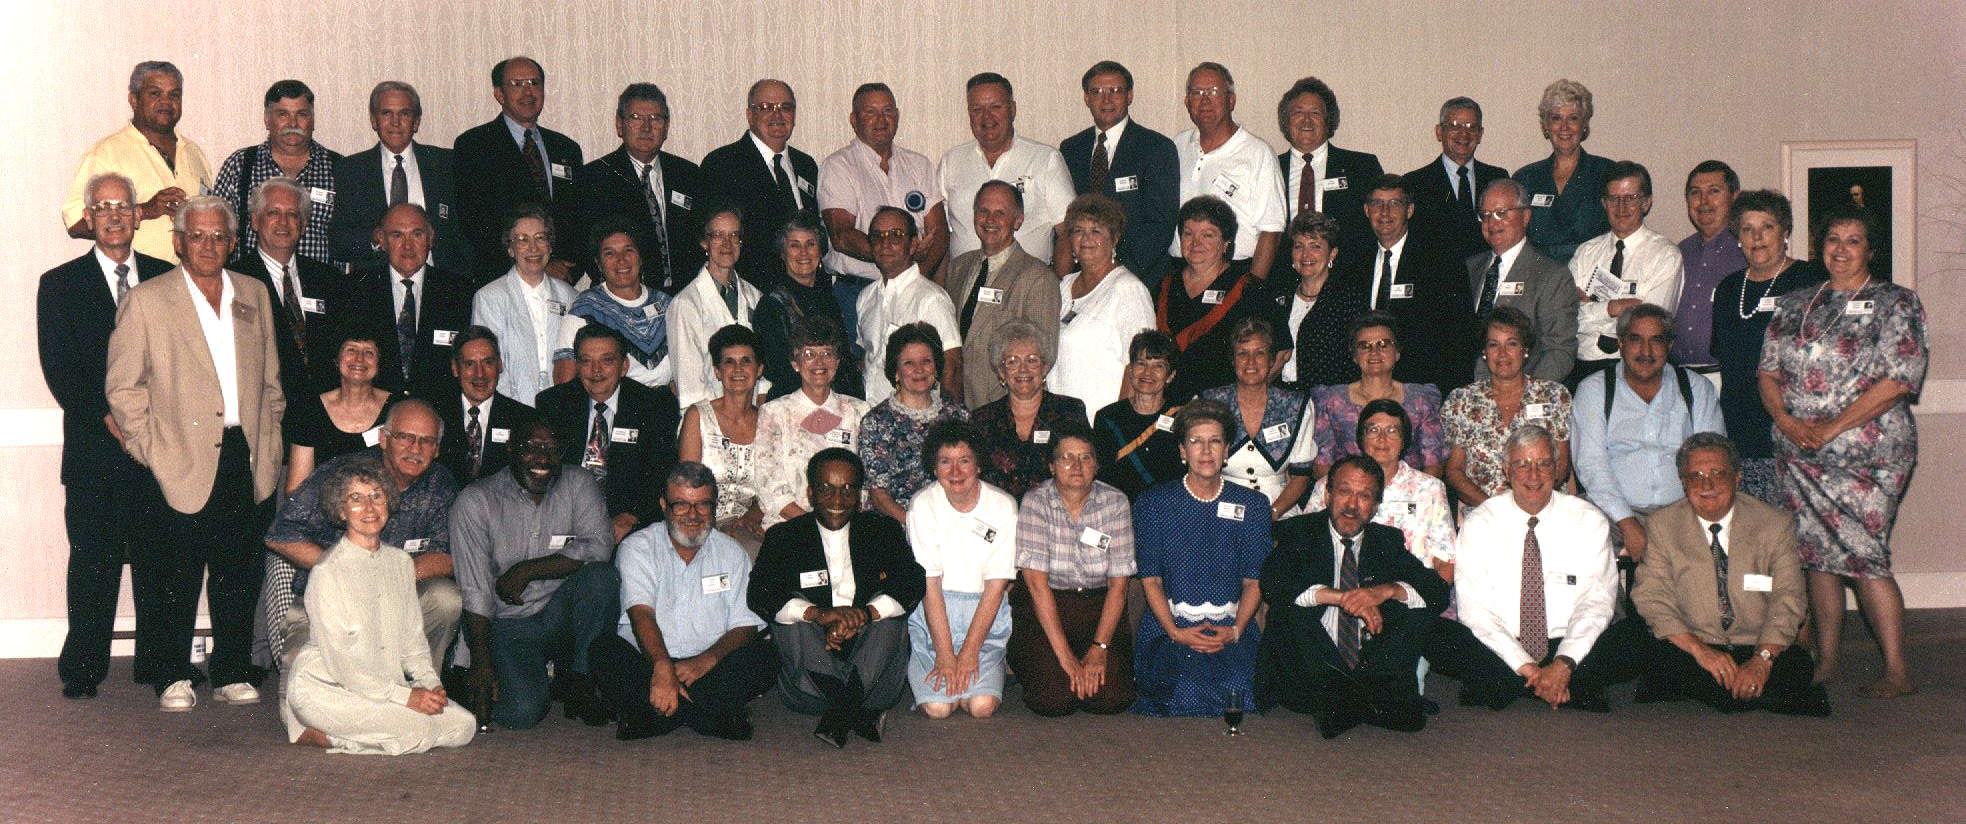 Group Photo Of The Class Of 1955 At The 40th  Reunion